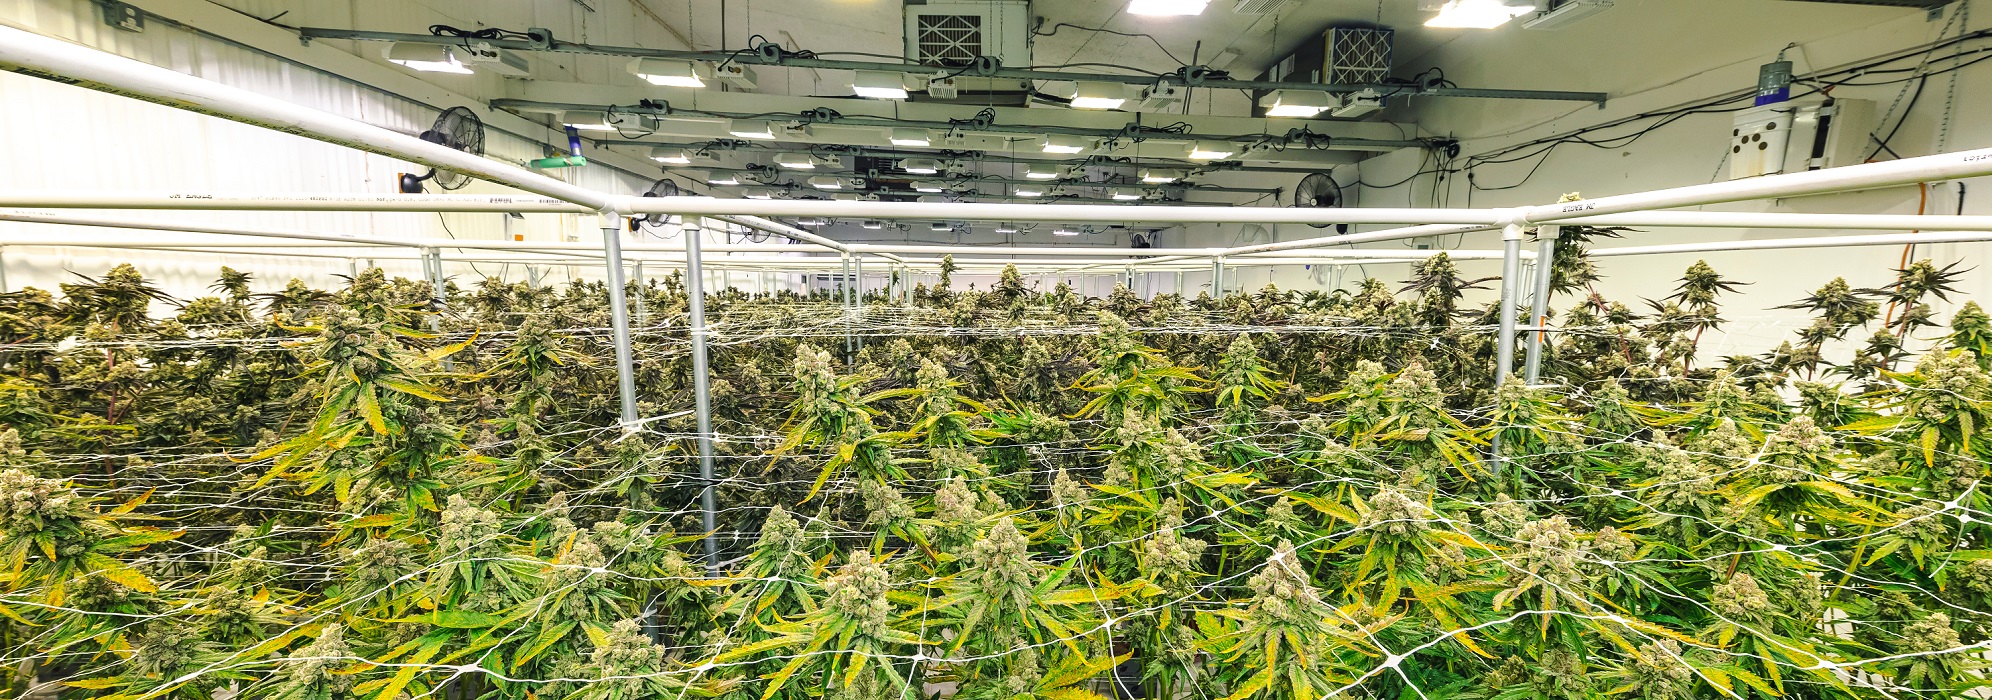 3 Things To Consider Before Building a Cannabis Cultivation Facility